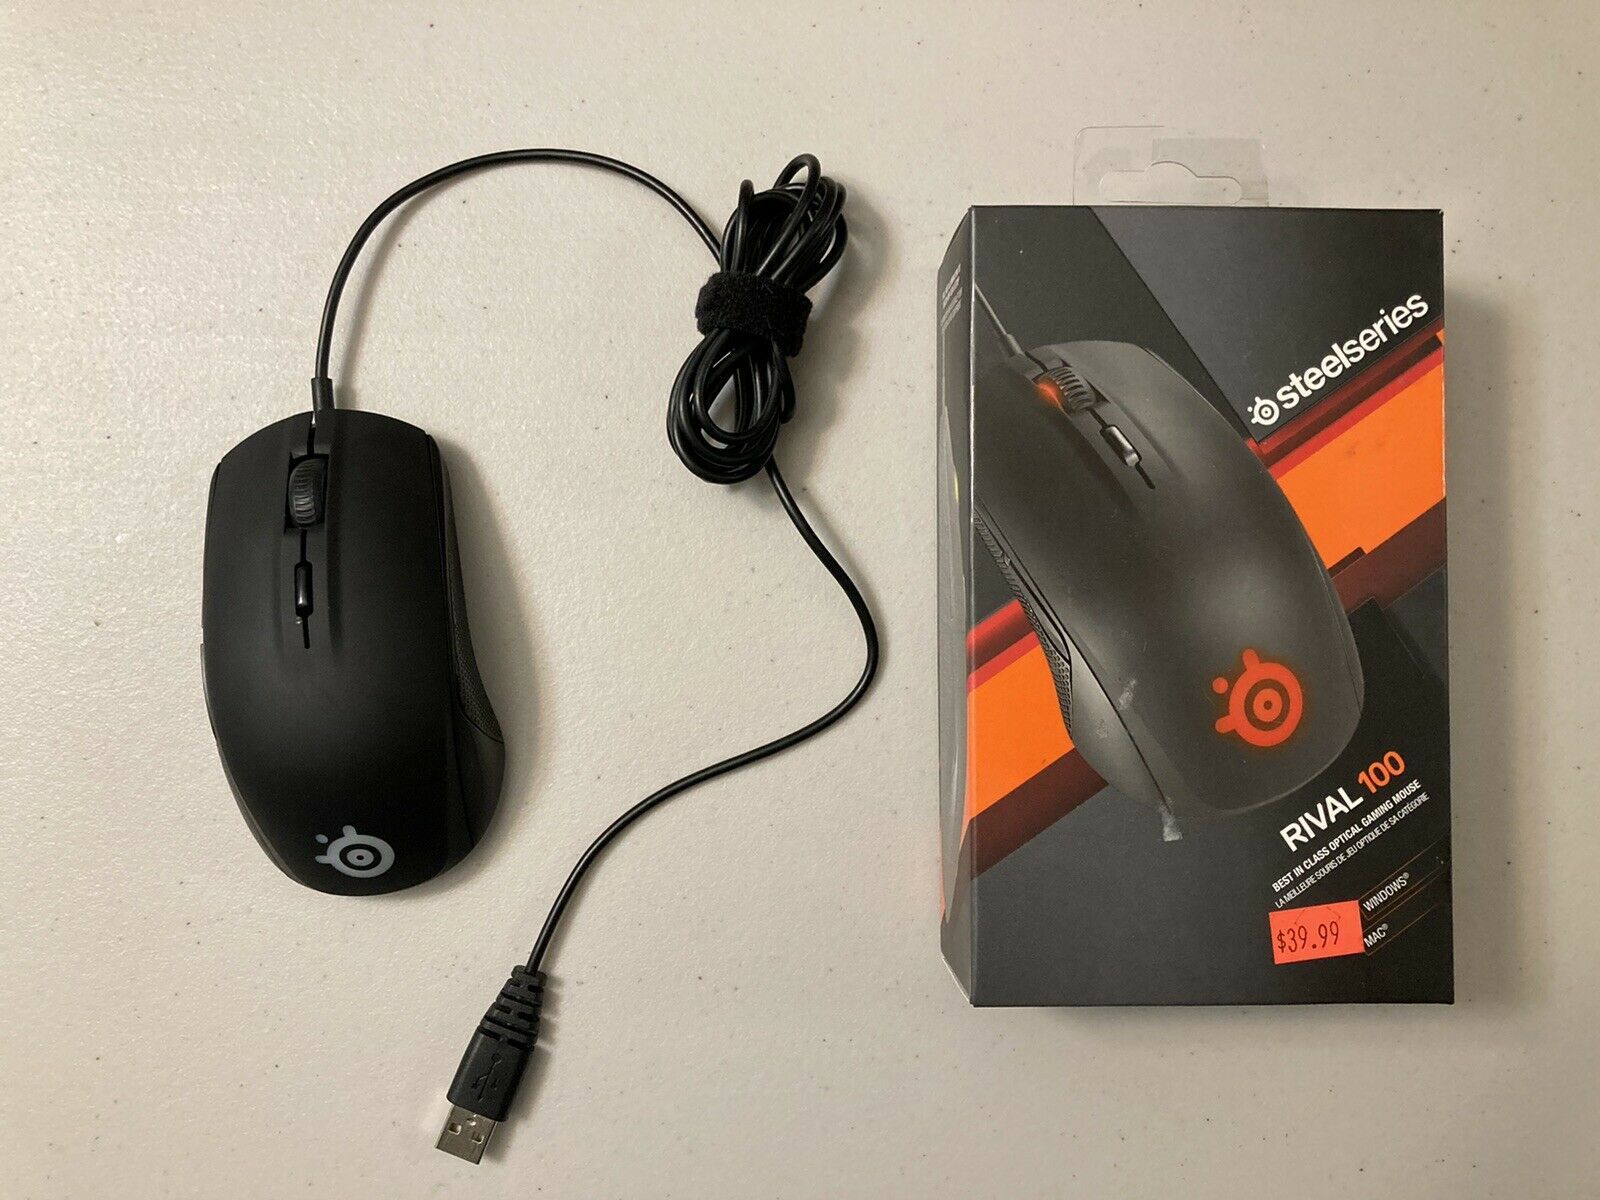 Steelseries Rival 100 RGB Optical Gaming Mouse (USB)